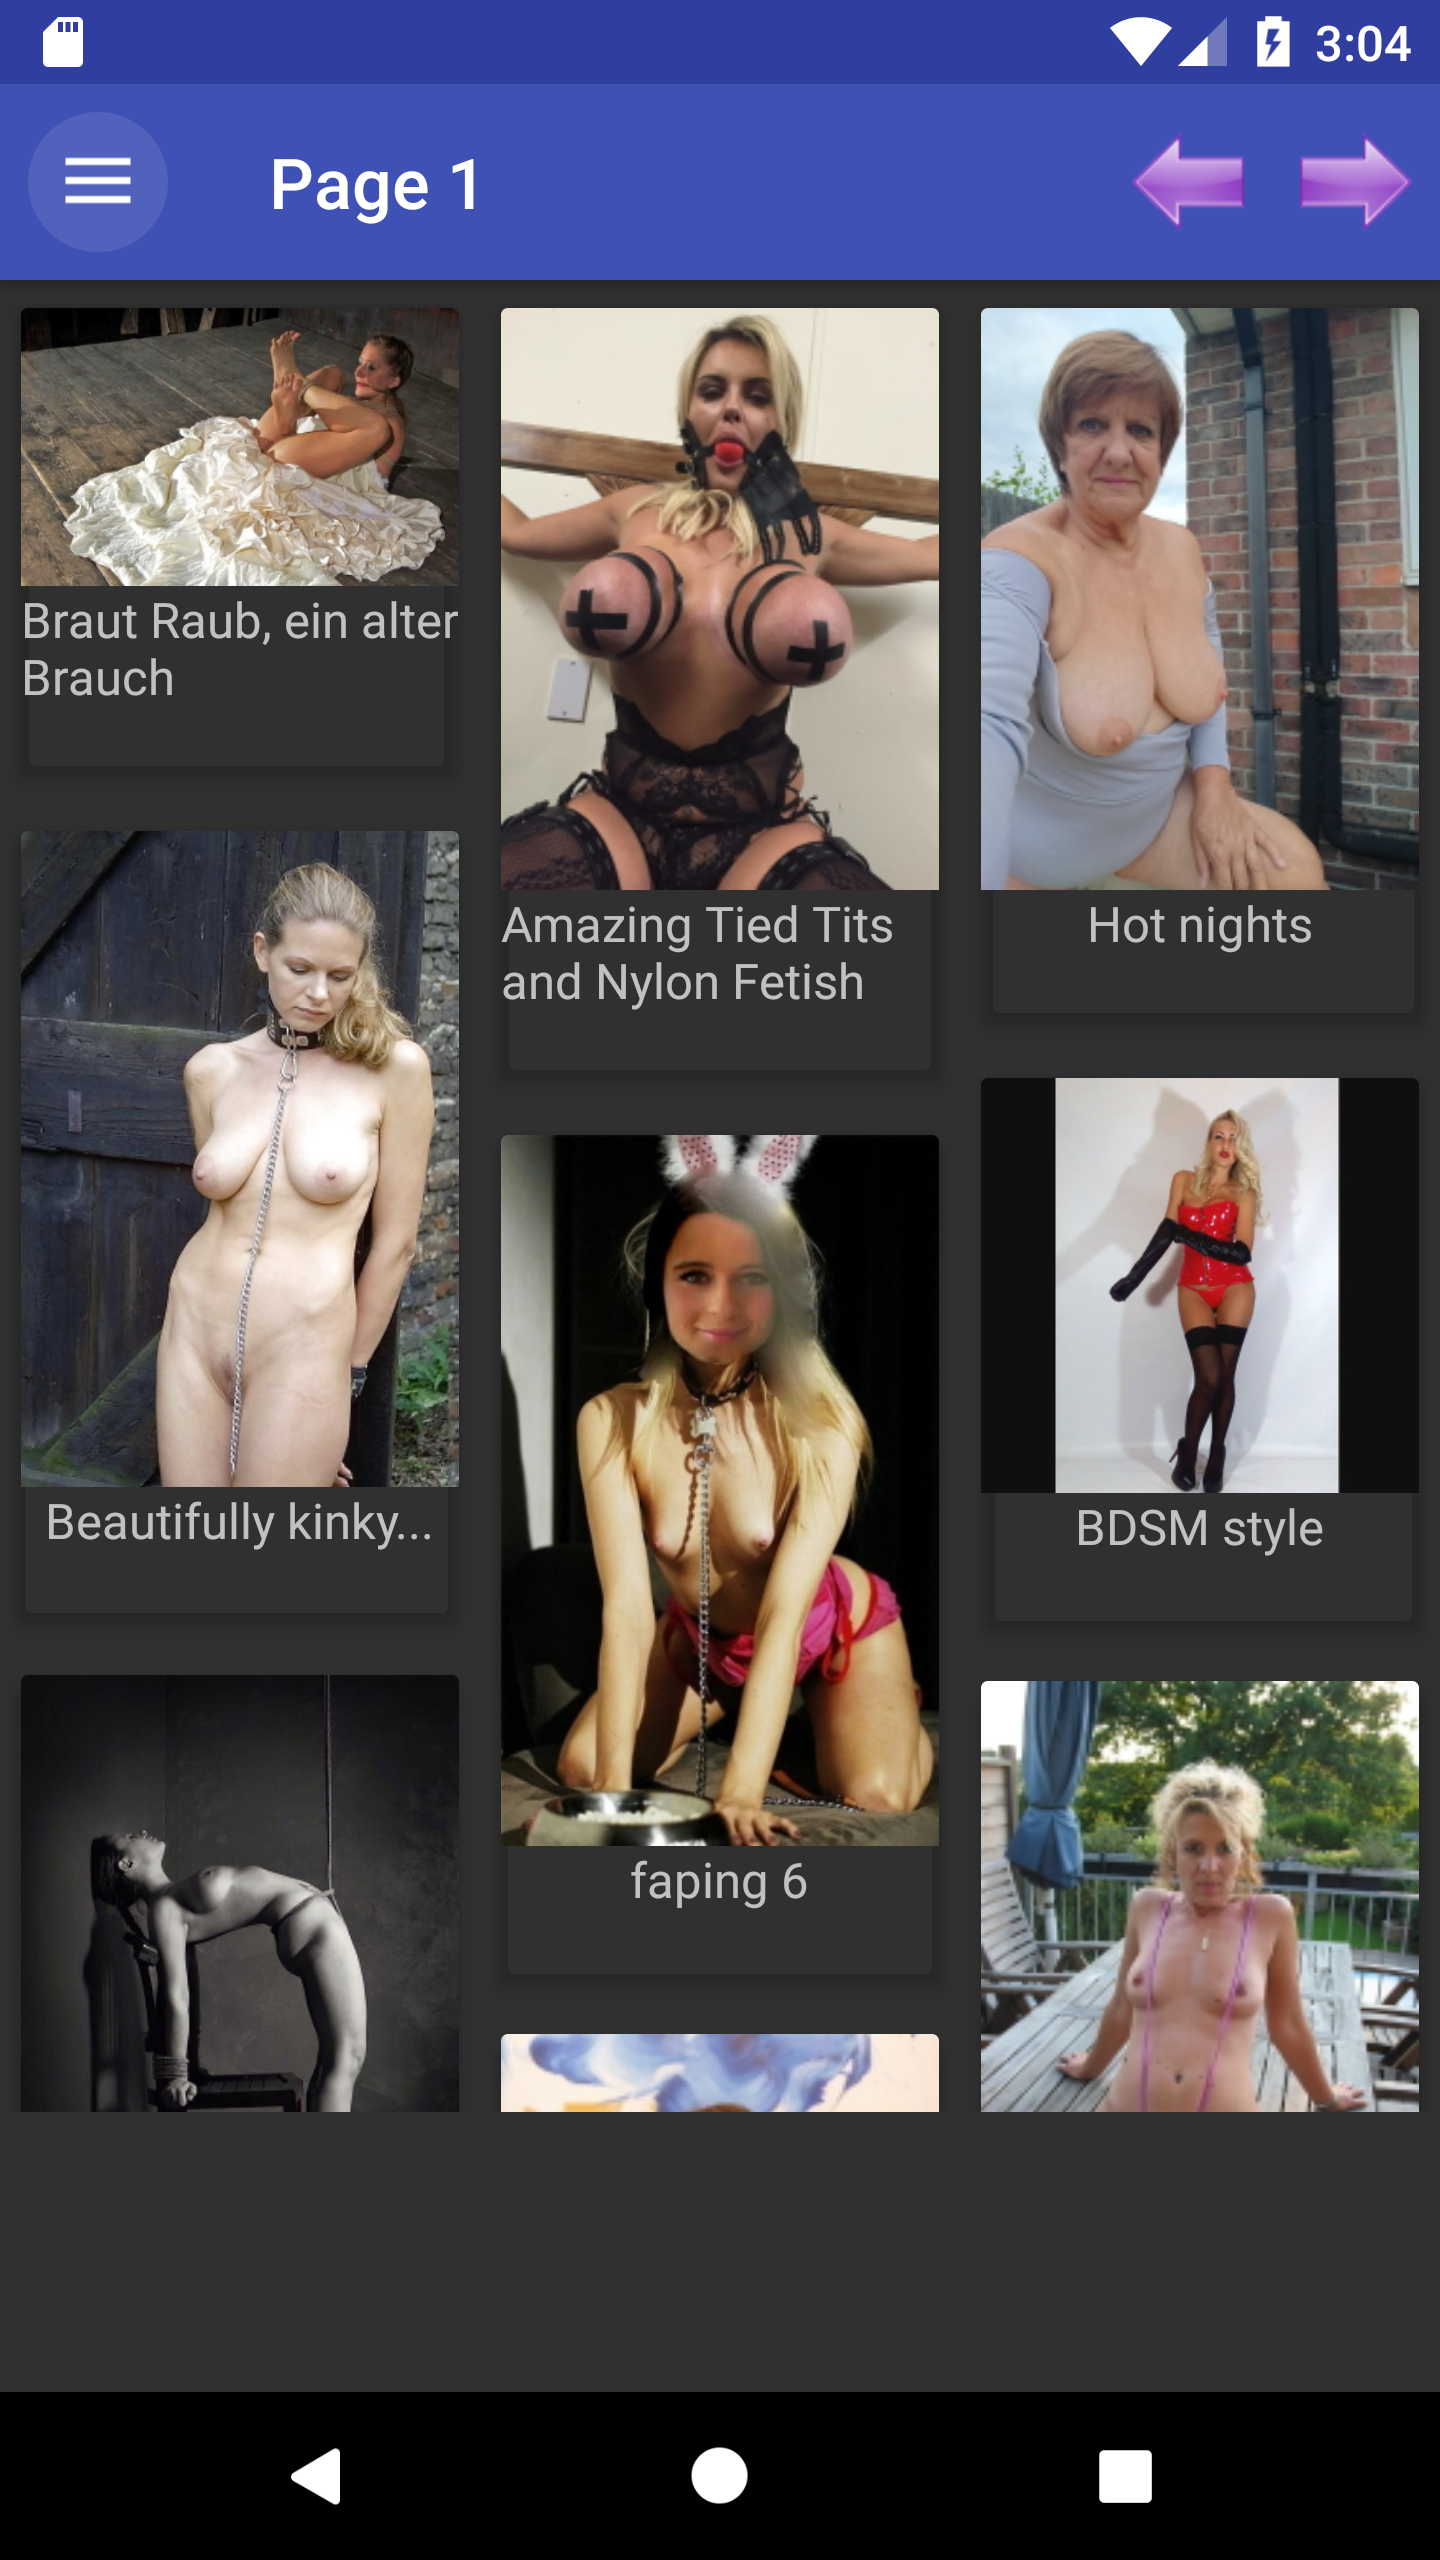 Bdsm android,pics,pornstars,hentai,sissy,galleries,hot,daily,pornstar,image,hentie,caprice,sexy,best,for,watching,app,apps,free,adult,porn,titty,application